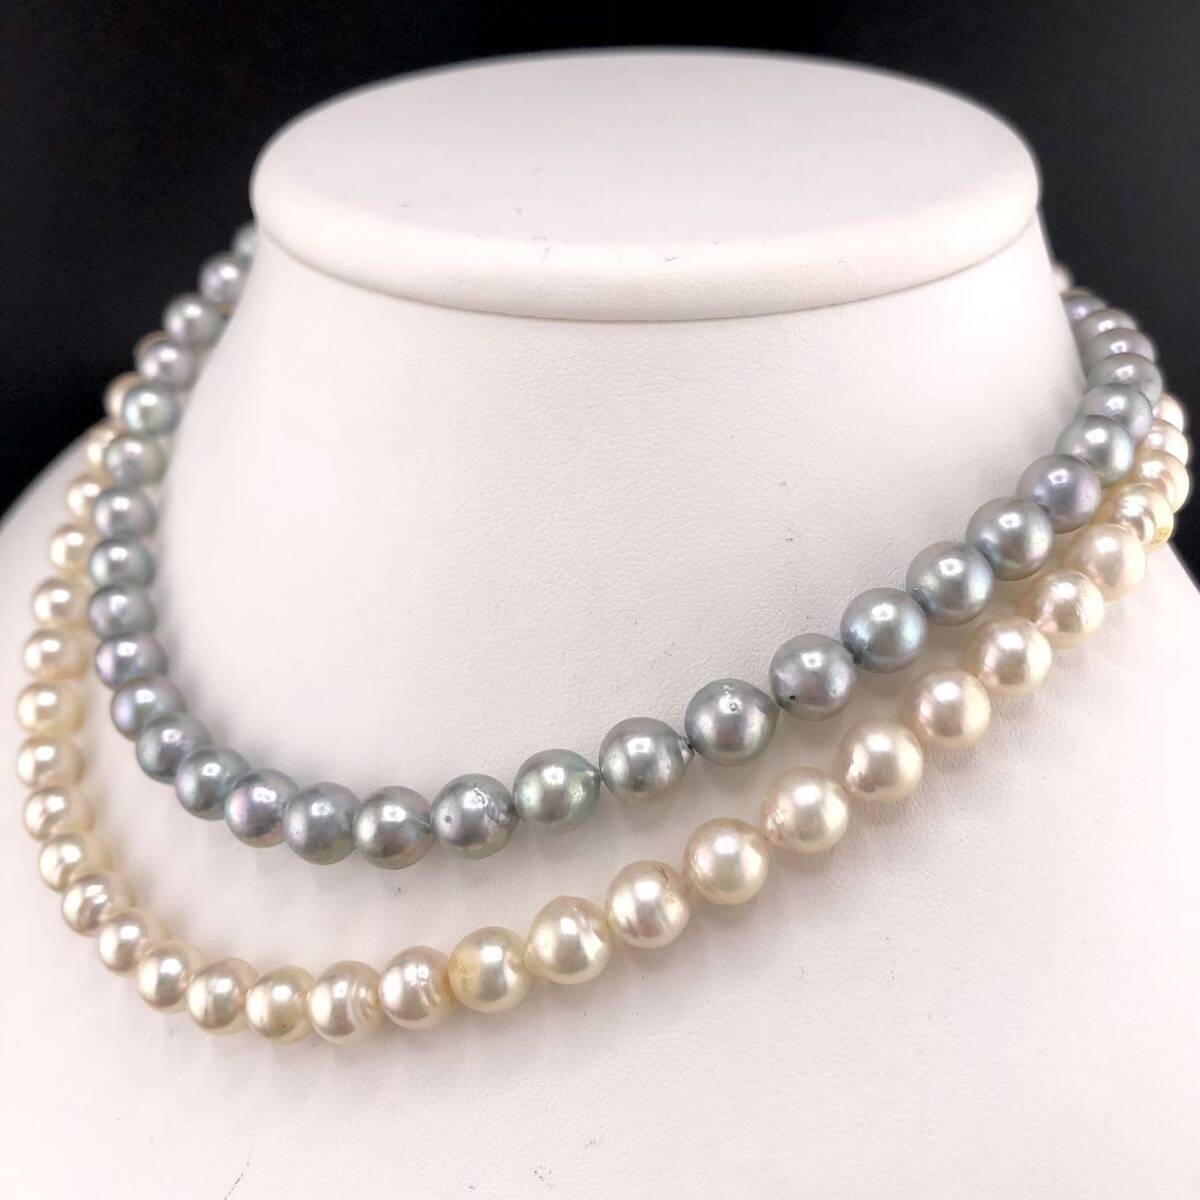 P03-0009 ロングパールネックレス 7.5mm~8.0mm 84cm 72g ( ロング Pearl necklace SV accessory jewelry )_画像2